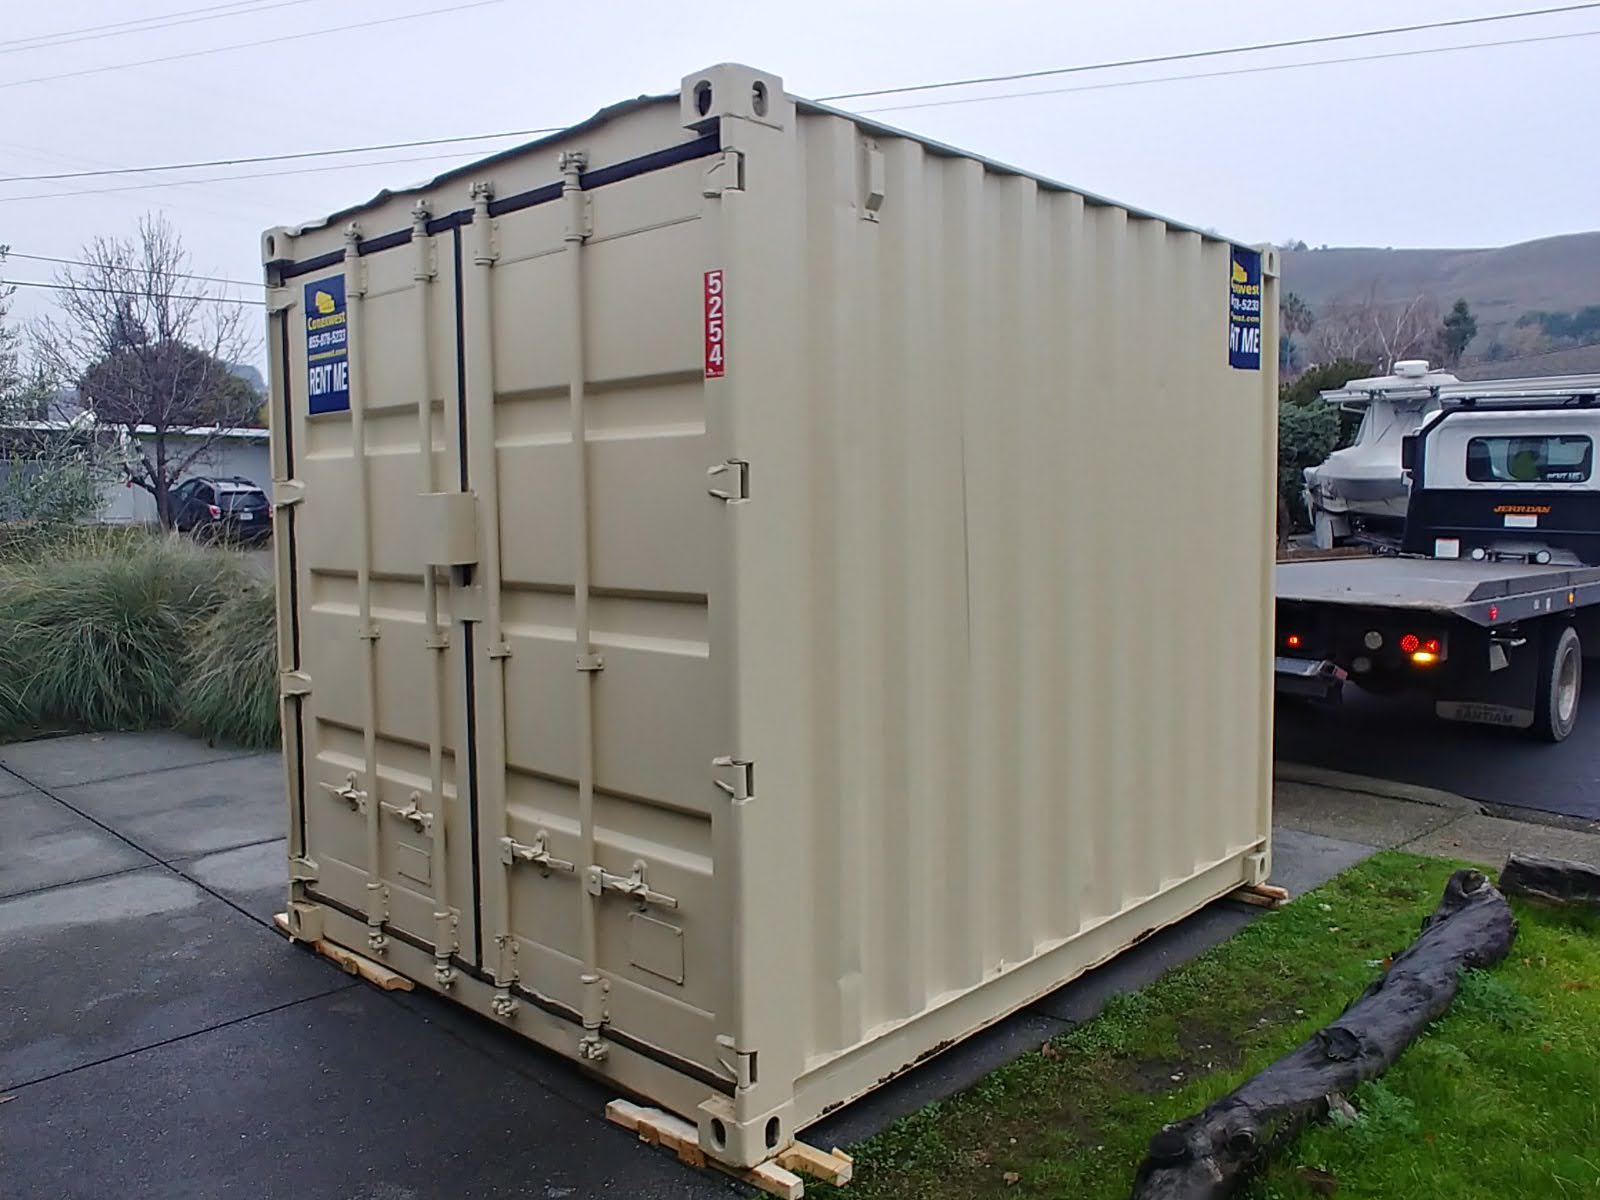 10' Storage Container for Rent - American Trailer Rentals